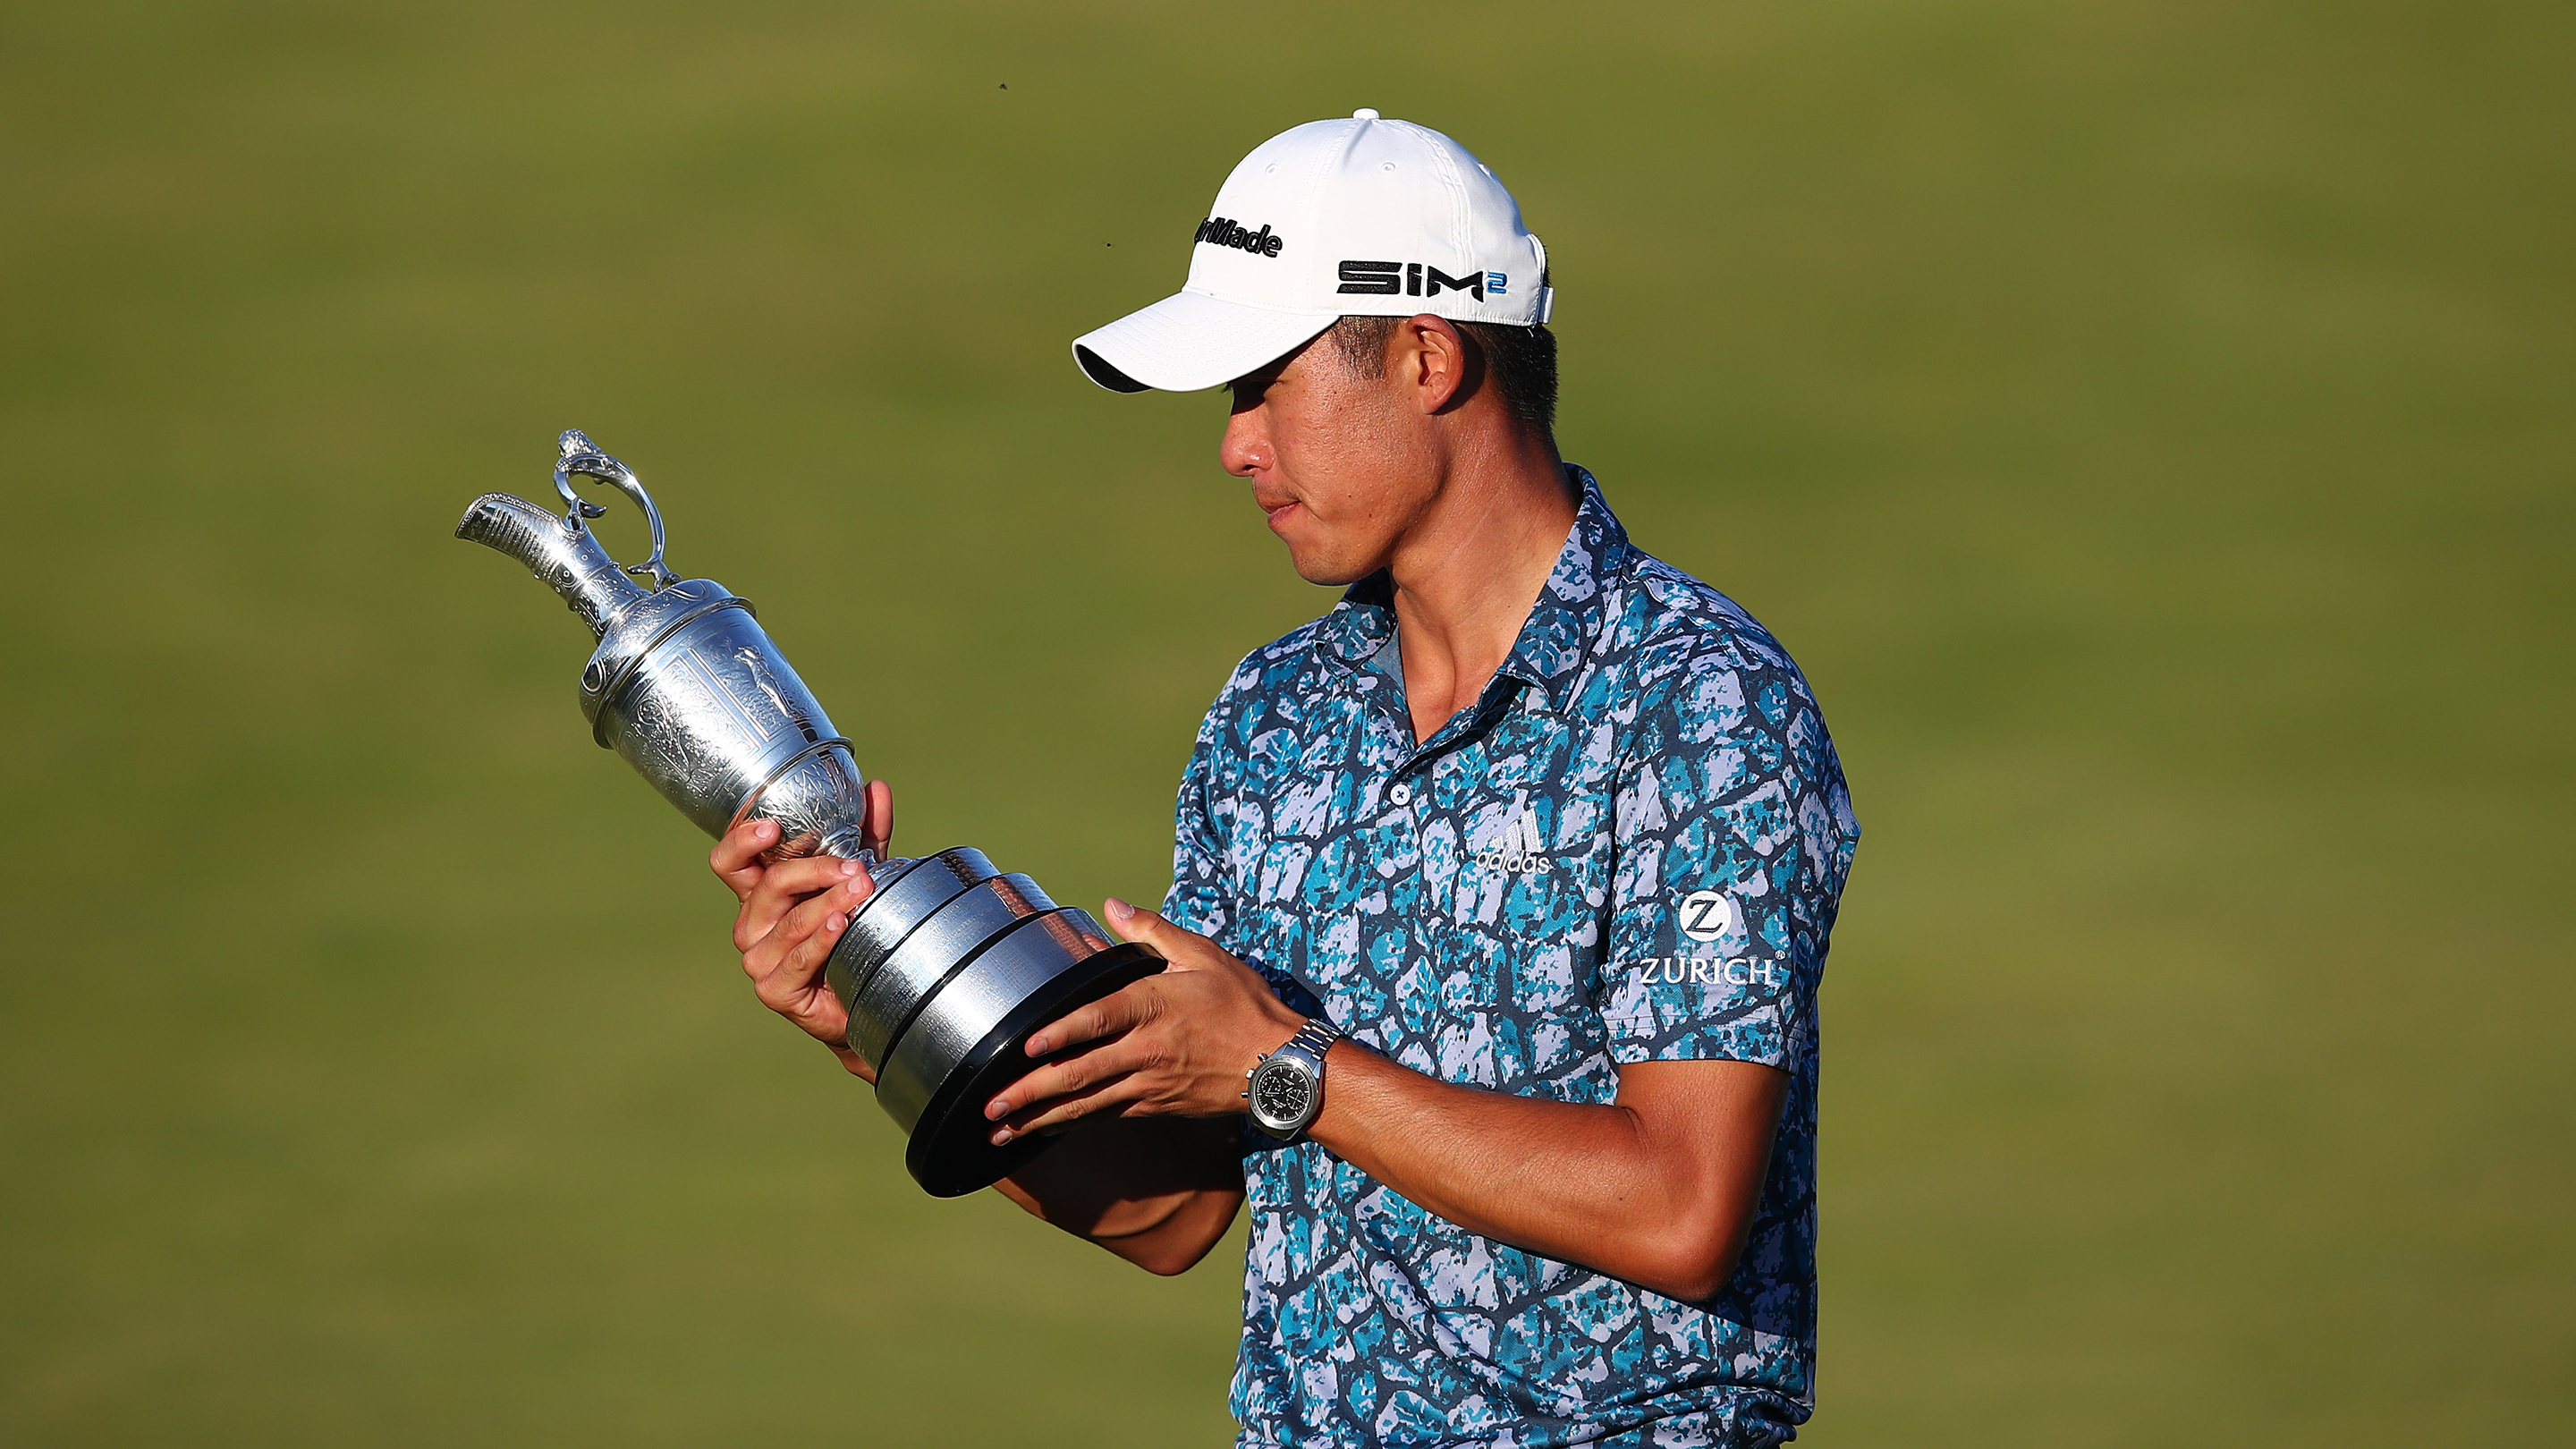 Watch Spotting Collin Morikawa Celebrates His Open Championship With An Omega Speedmaster